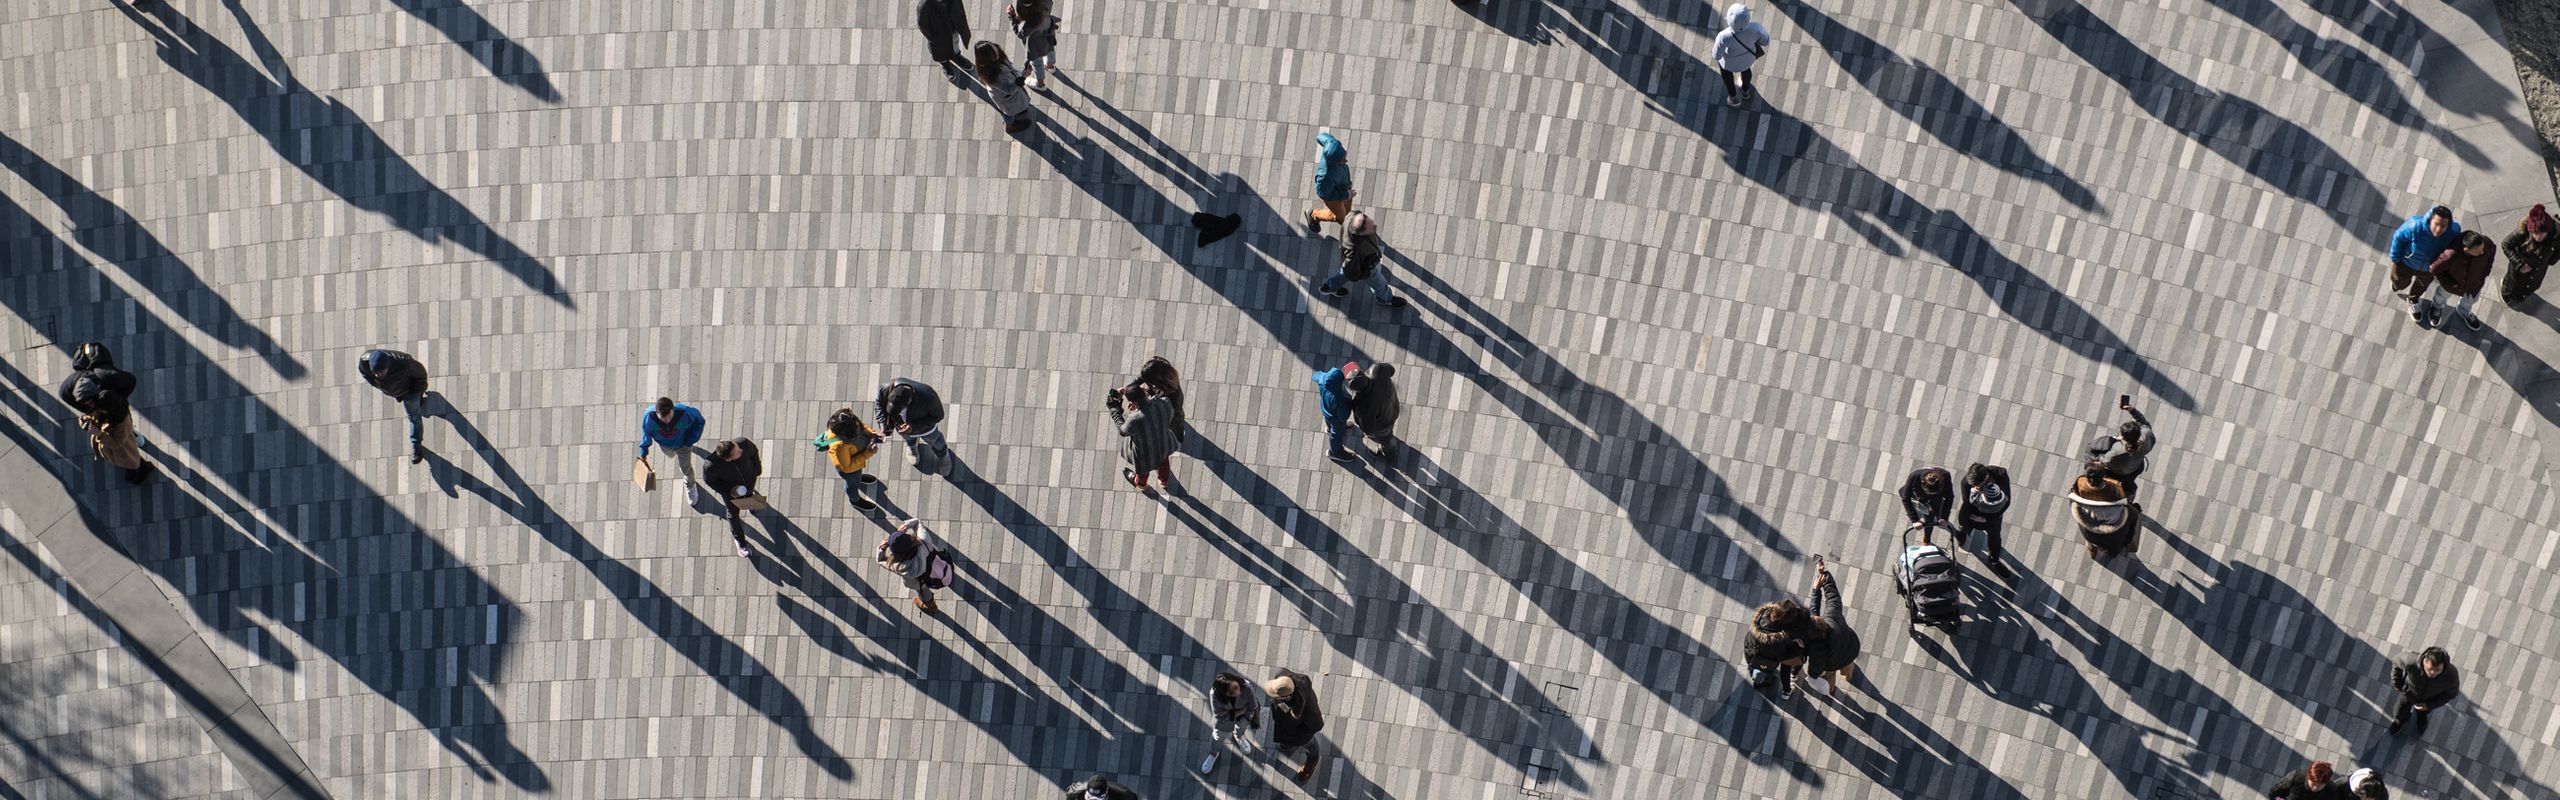 people walking with shadows behind them